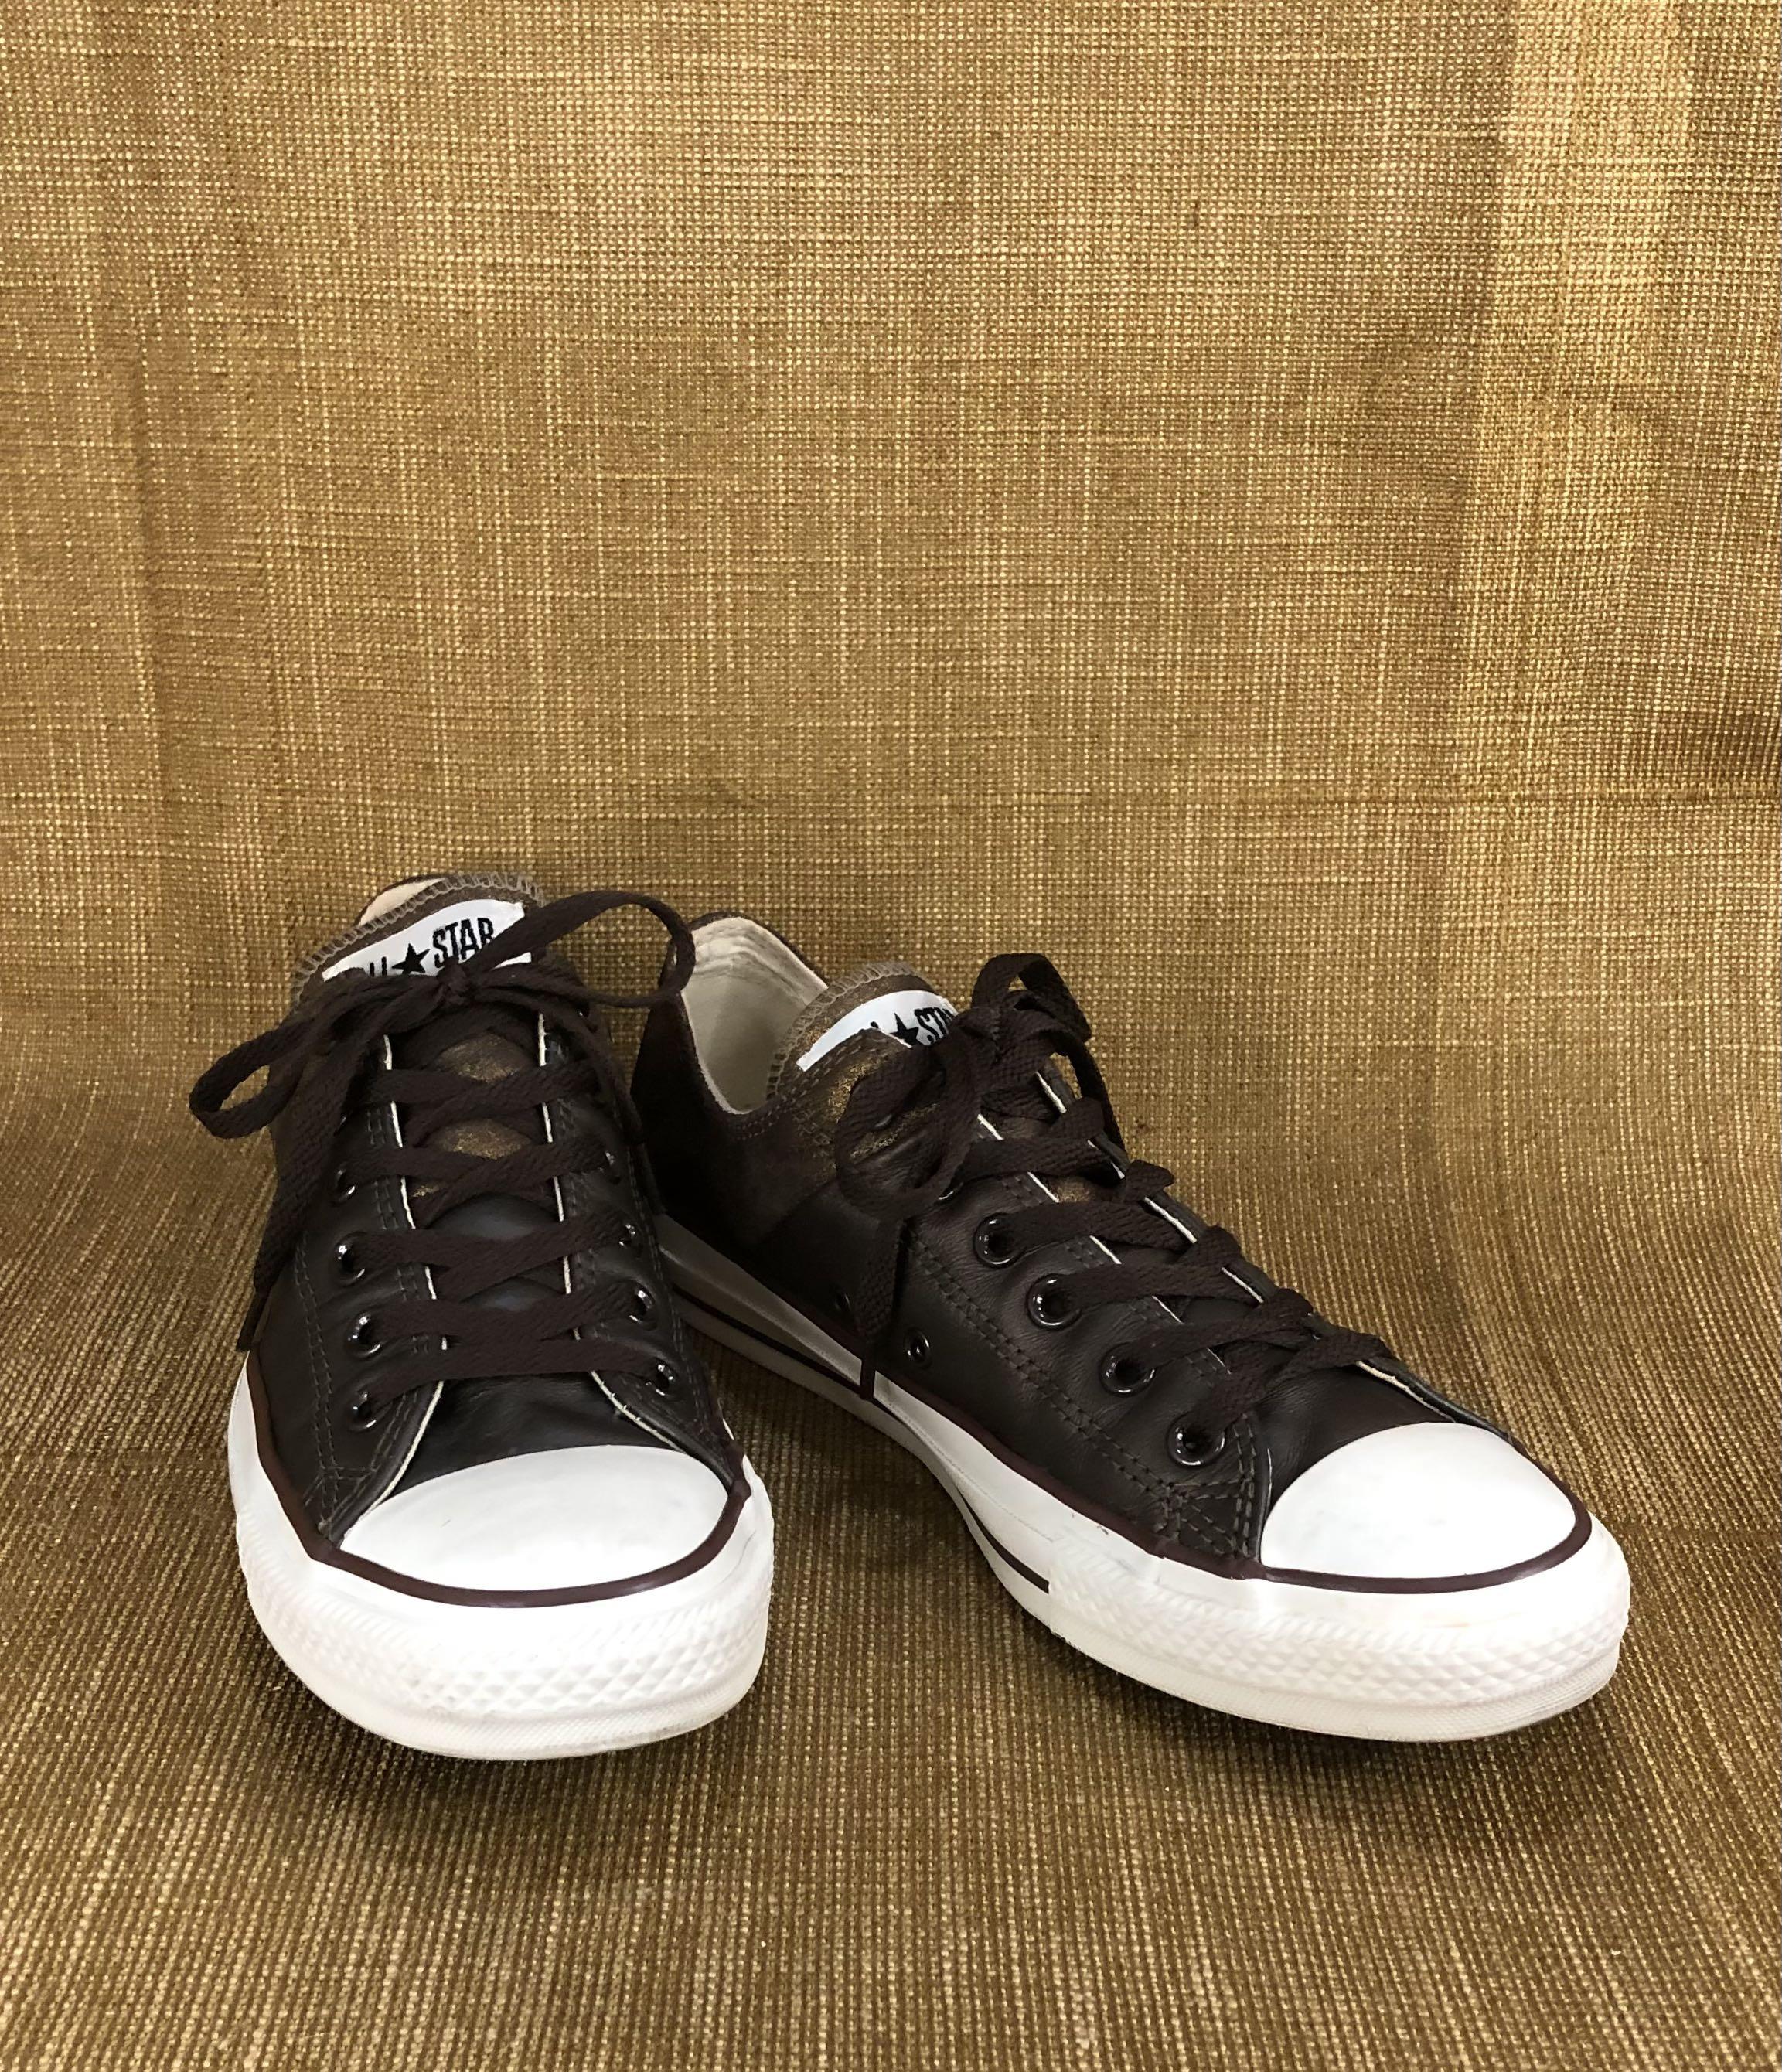 AUTHENTIC CONVERSE ALL STAR LOW BROWN/BRONZE, Men's Fashion, Footwear,  Sneakers on Carousell